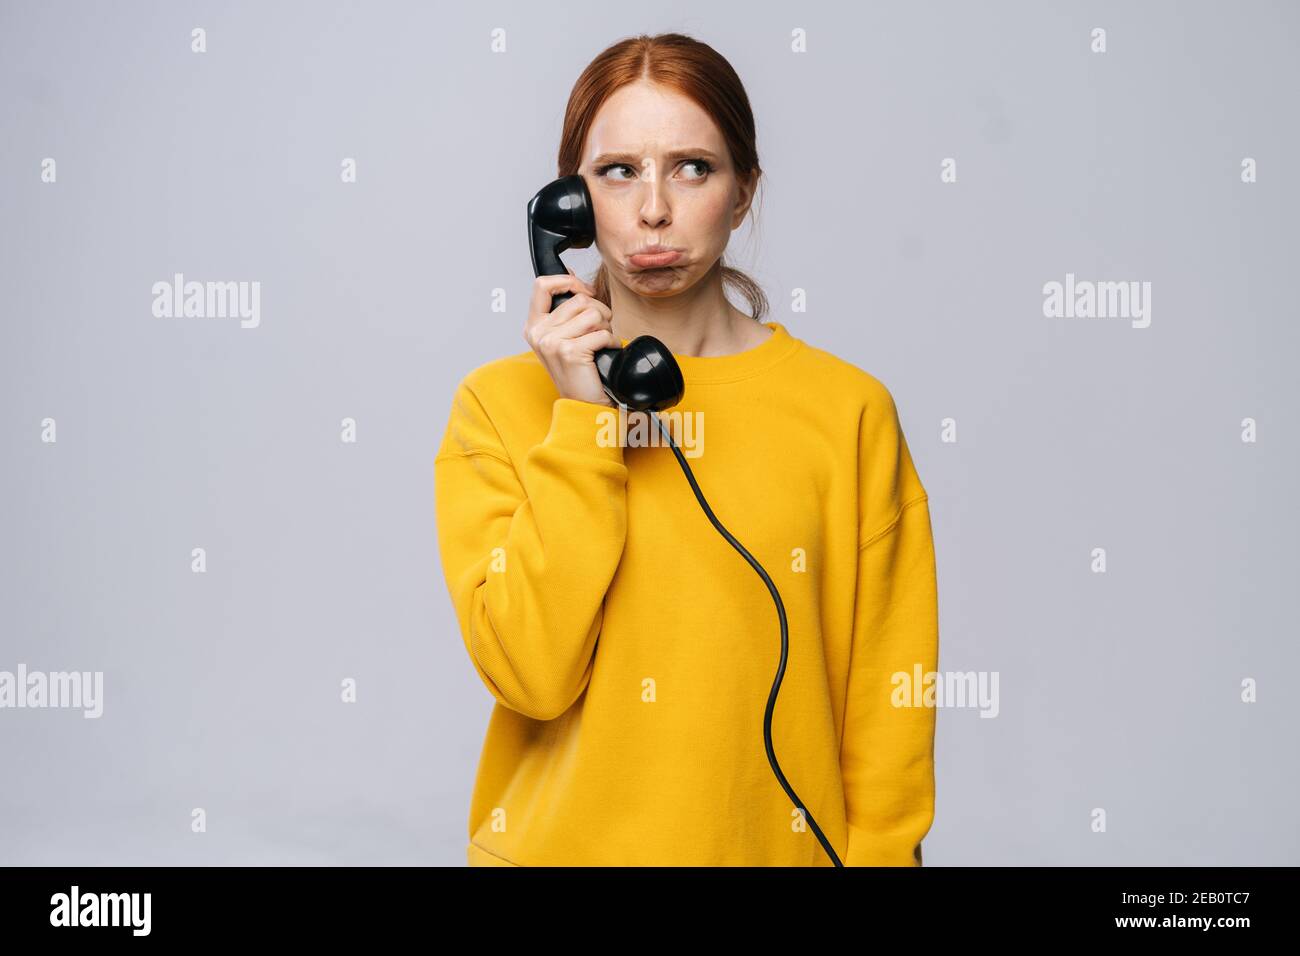 Confused young woman in stylish yellow sweater talking on retro phone and looking away Stock Photo